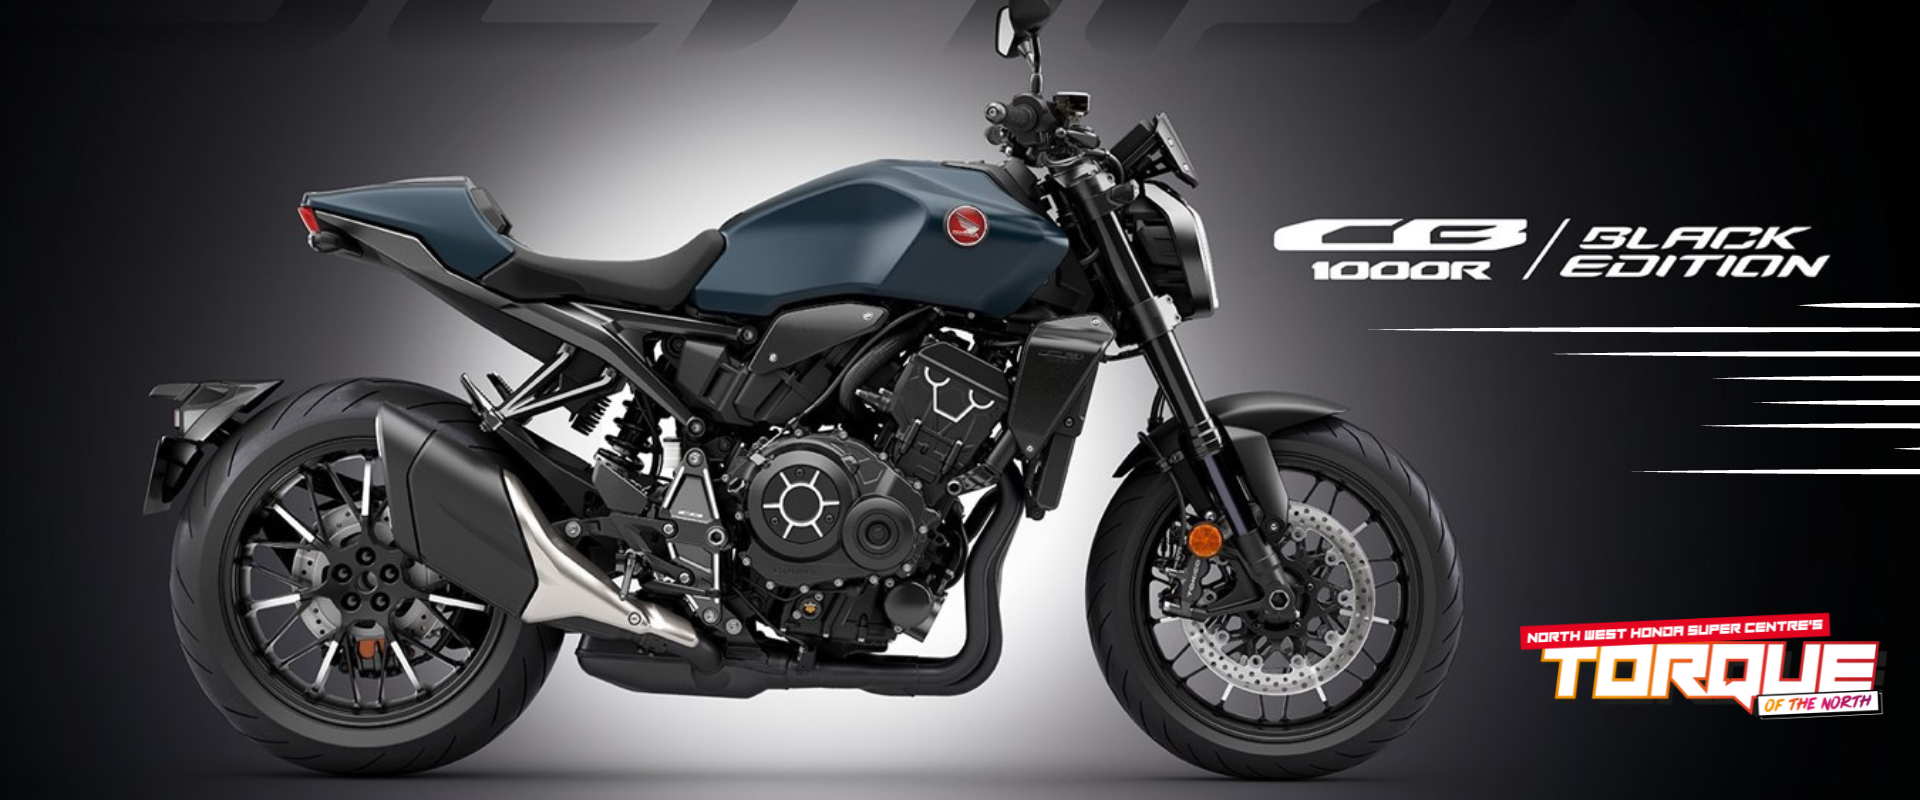 Welcome to the dark side with the brand-new Honda CB1000R